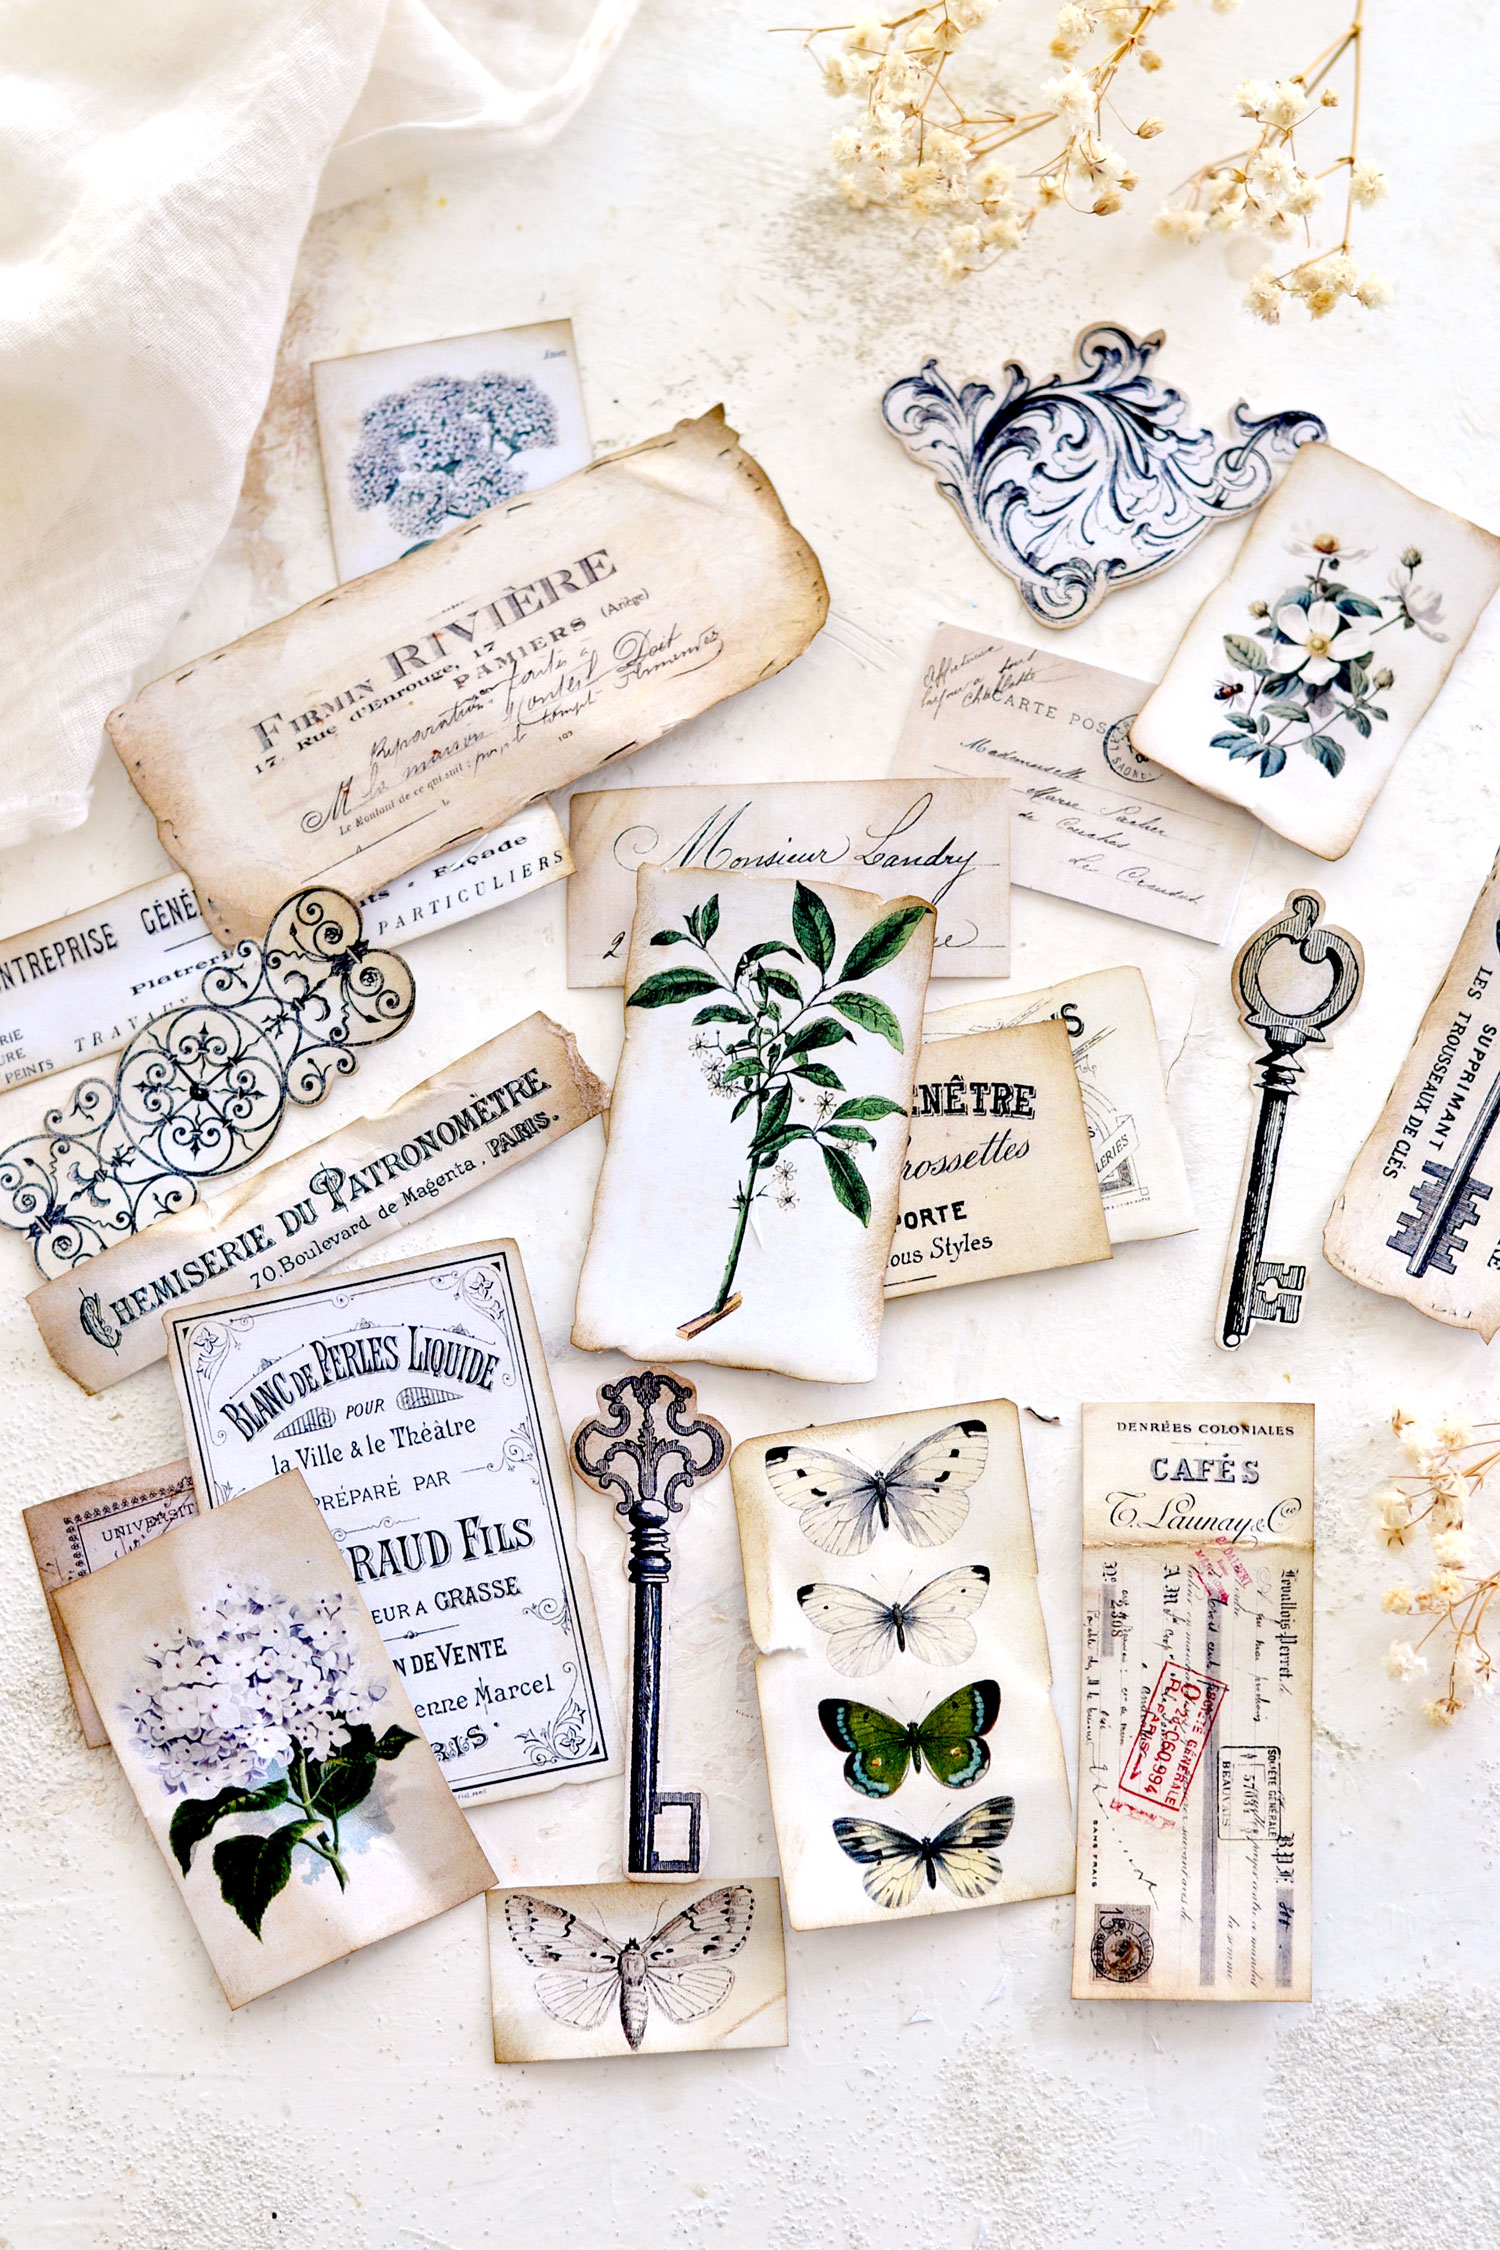 Distressed Junk Journal Pages